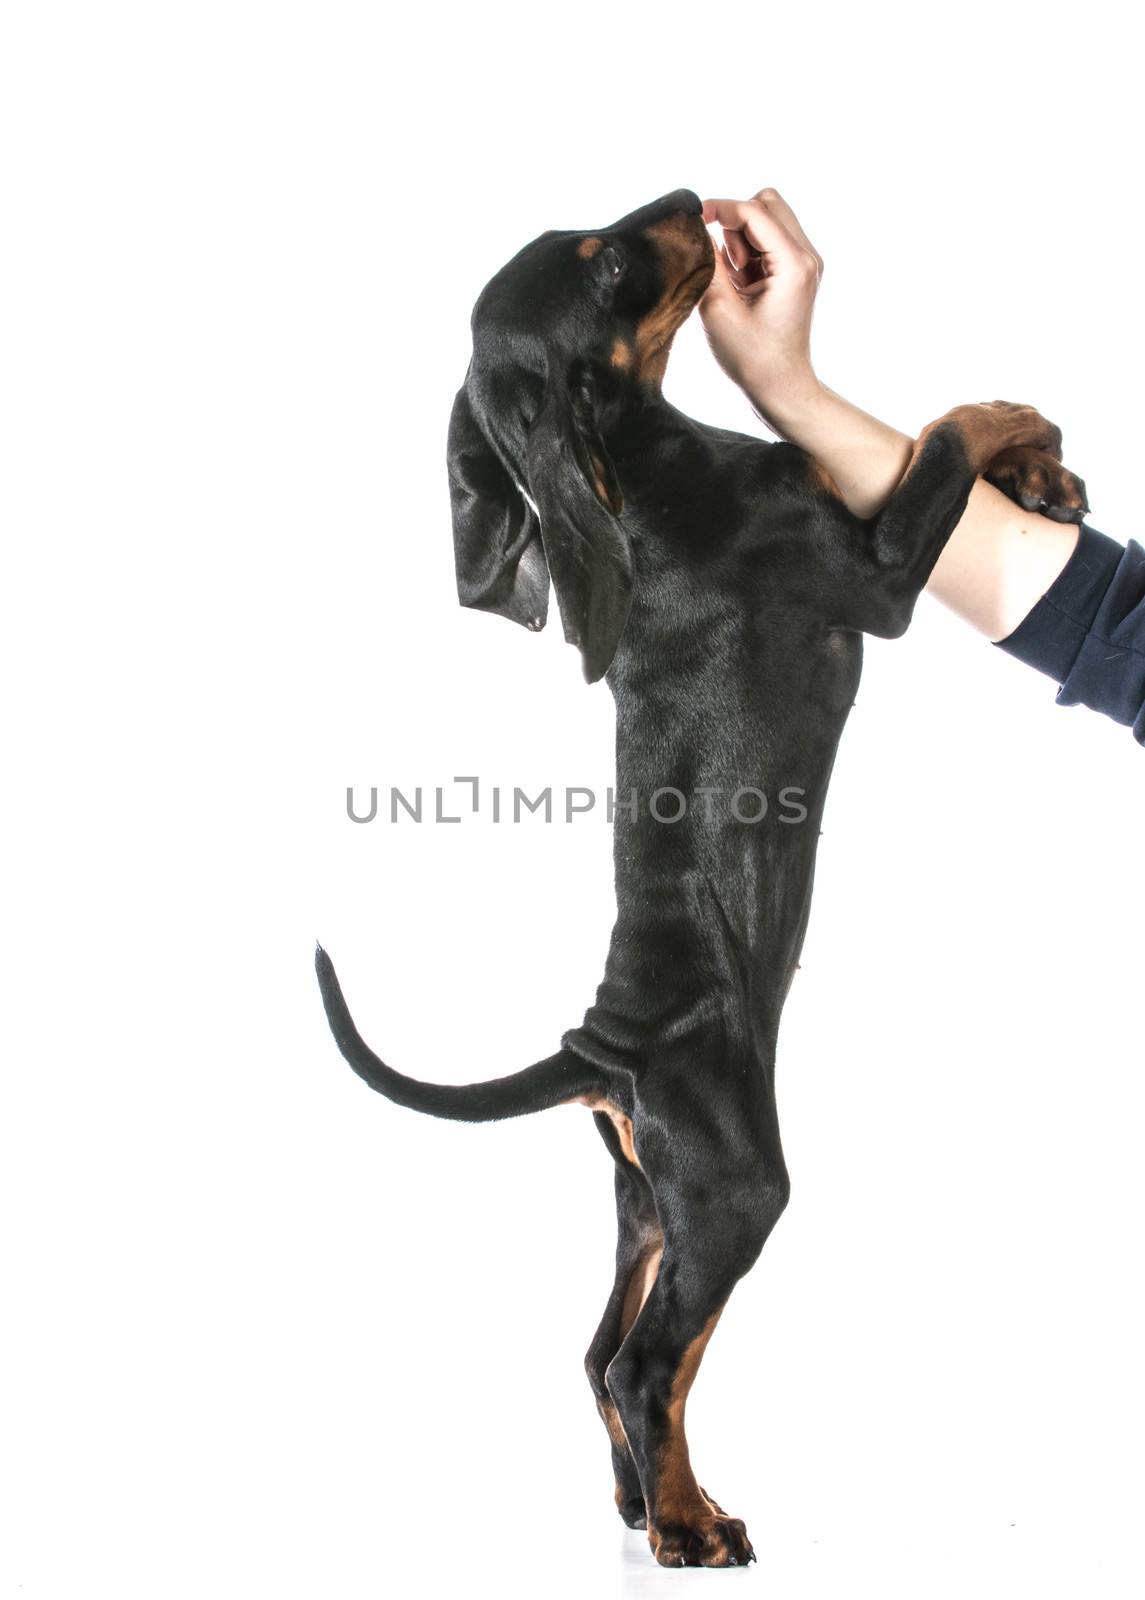 dog training - woman's hand feeding dog a treat while teaching it to stand on it's back legs